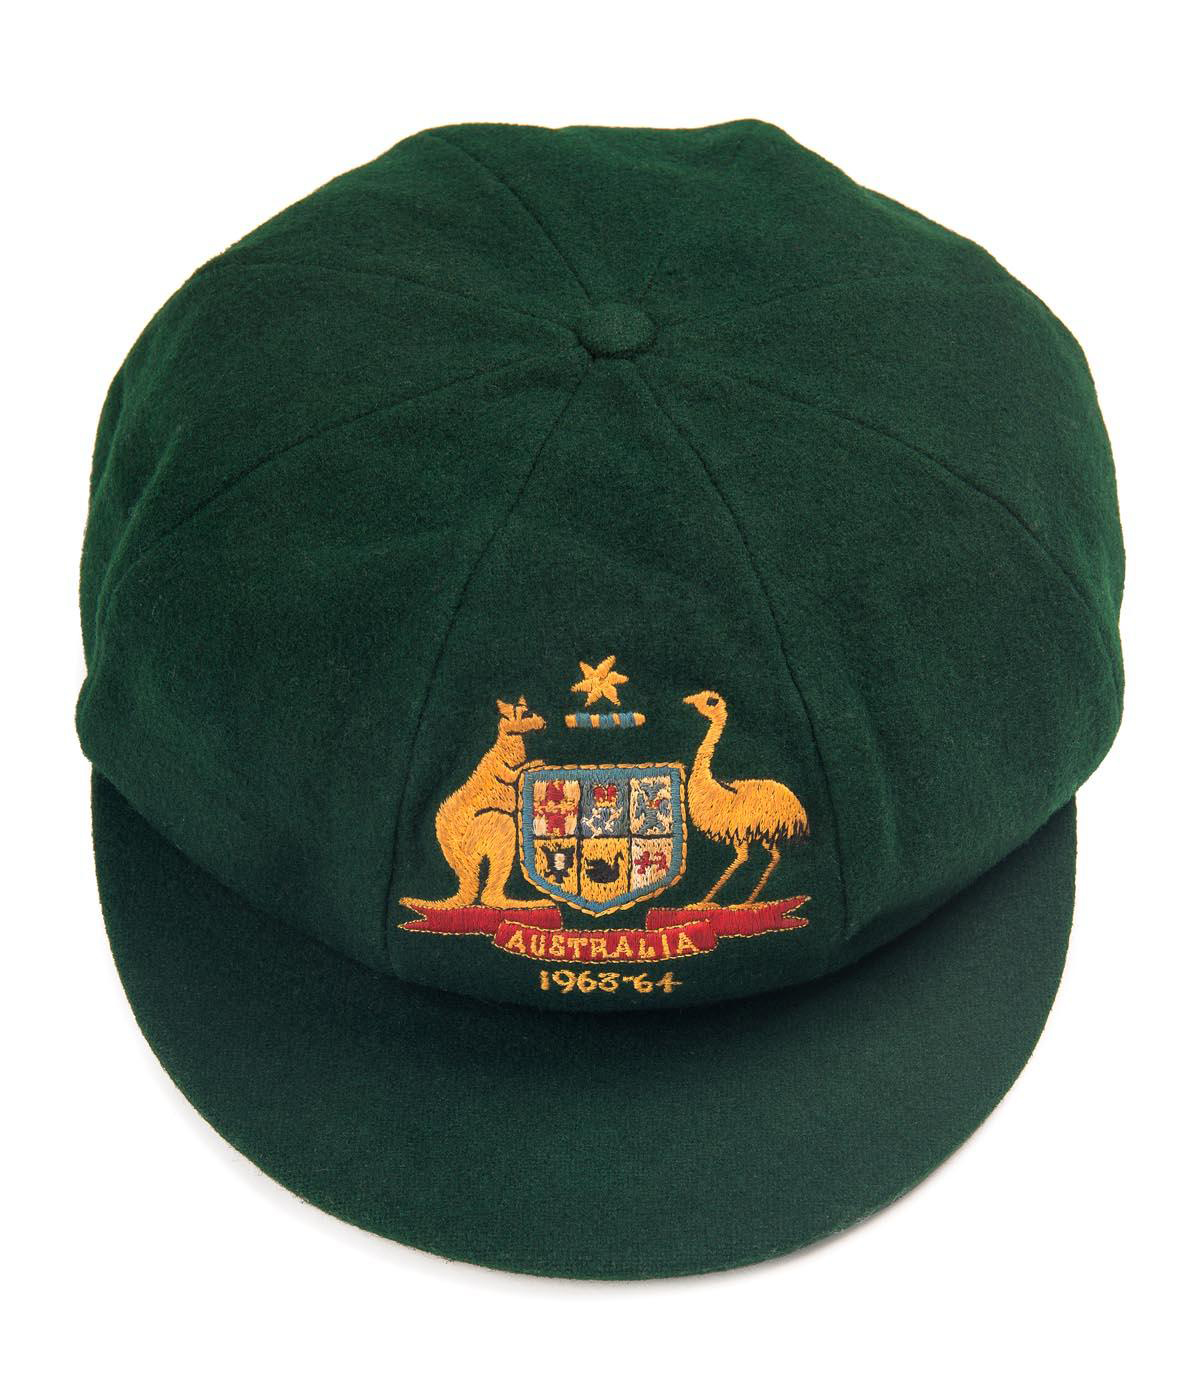 Demand for sporting memorabilia is stronger than ever and Mossgreen’s first auction of this type for 2016 is a great example. To be held on February 8 at 926-930 High Street Armadale, the auction features the Australian baggy green Test caps from two former Australian captains – one belonging to the late Richie Benaud from his last Test series in 1963-64 against South Africa and the other to Ian Chappell from the 1973-74 series against New Zealand. 